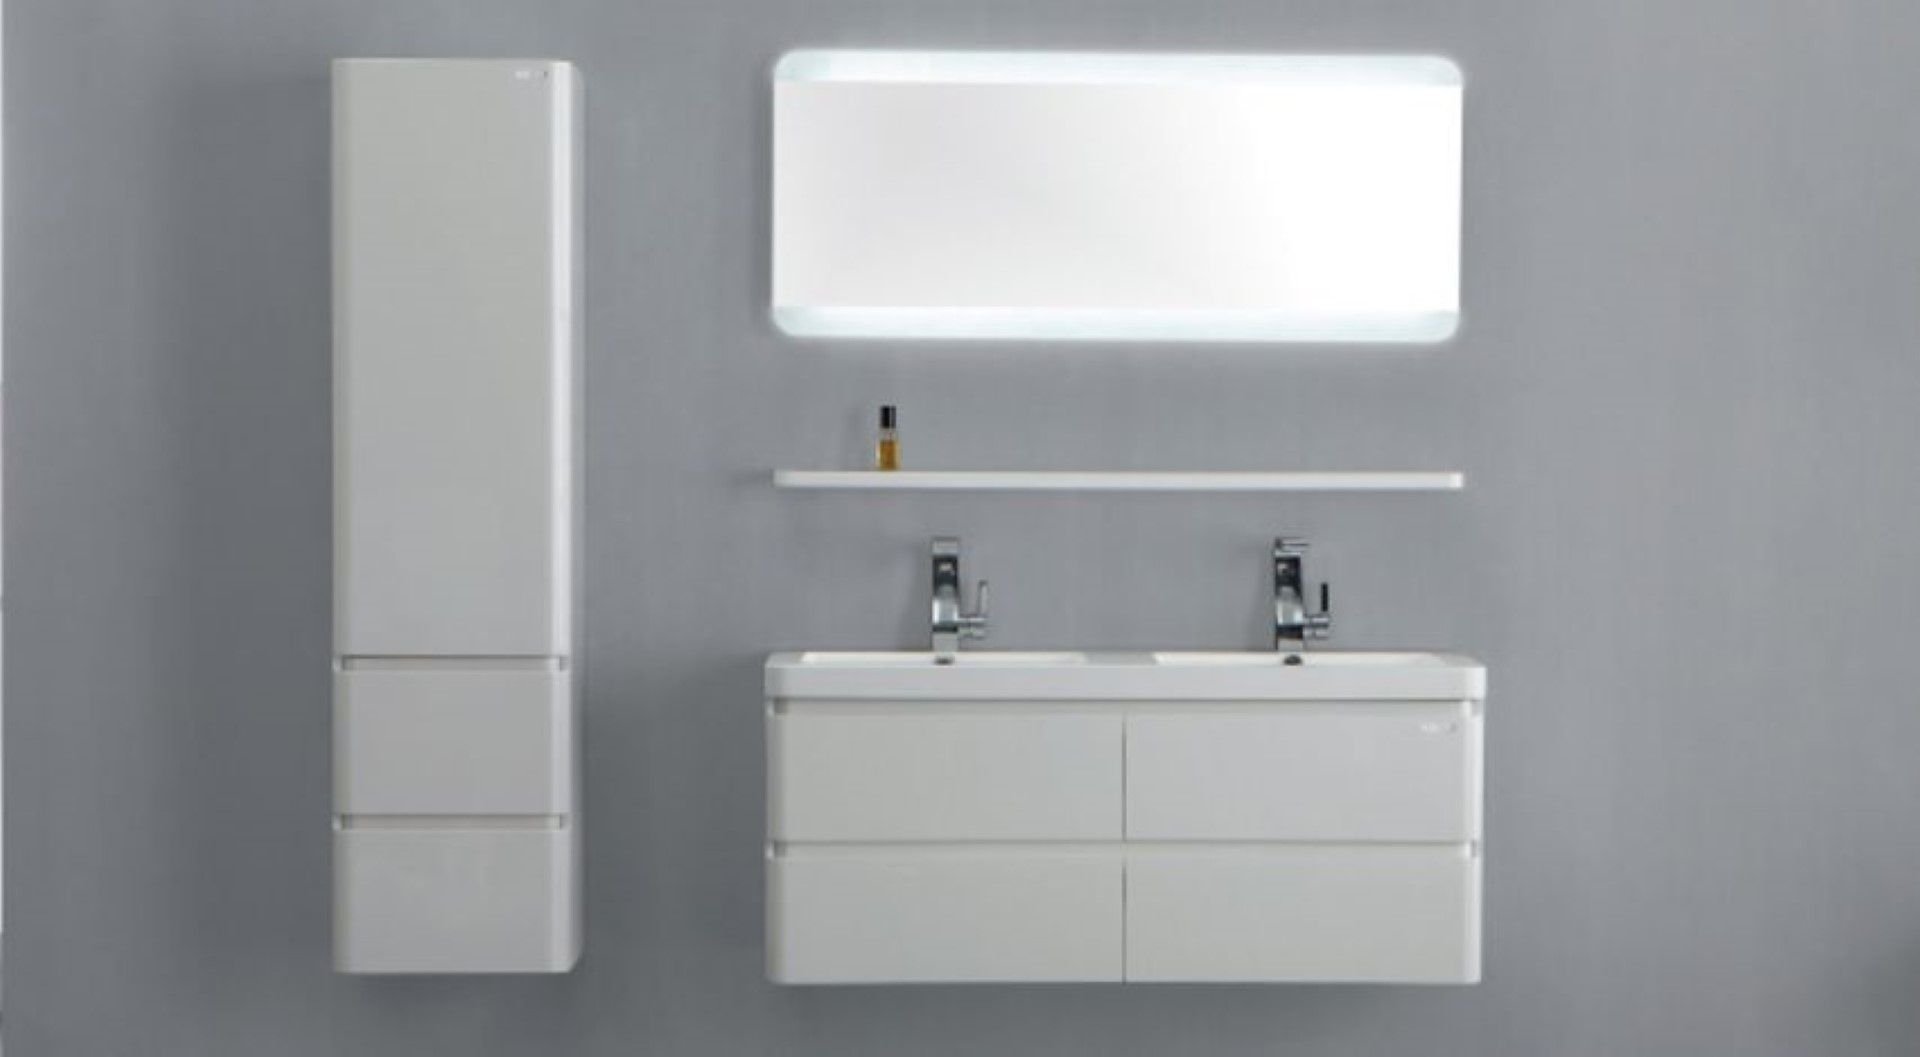 1 x Austin Bathrooms EDGE Backlit 1200mm Illuminated Wall Mirror With No Touch Sensors, Rounds Edges - Image 3 of 3